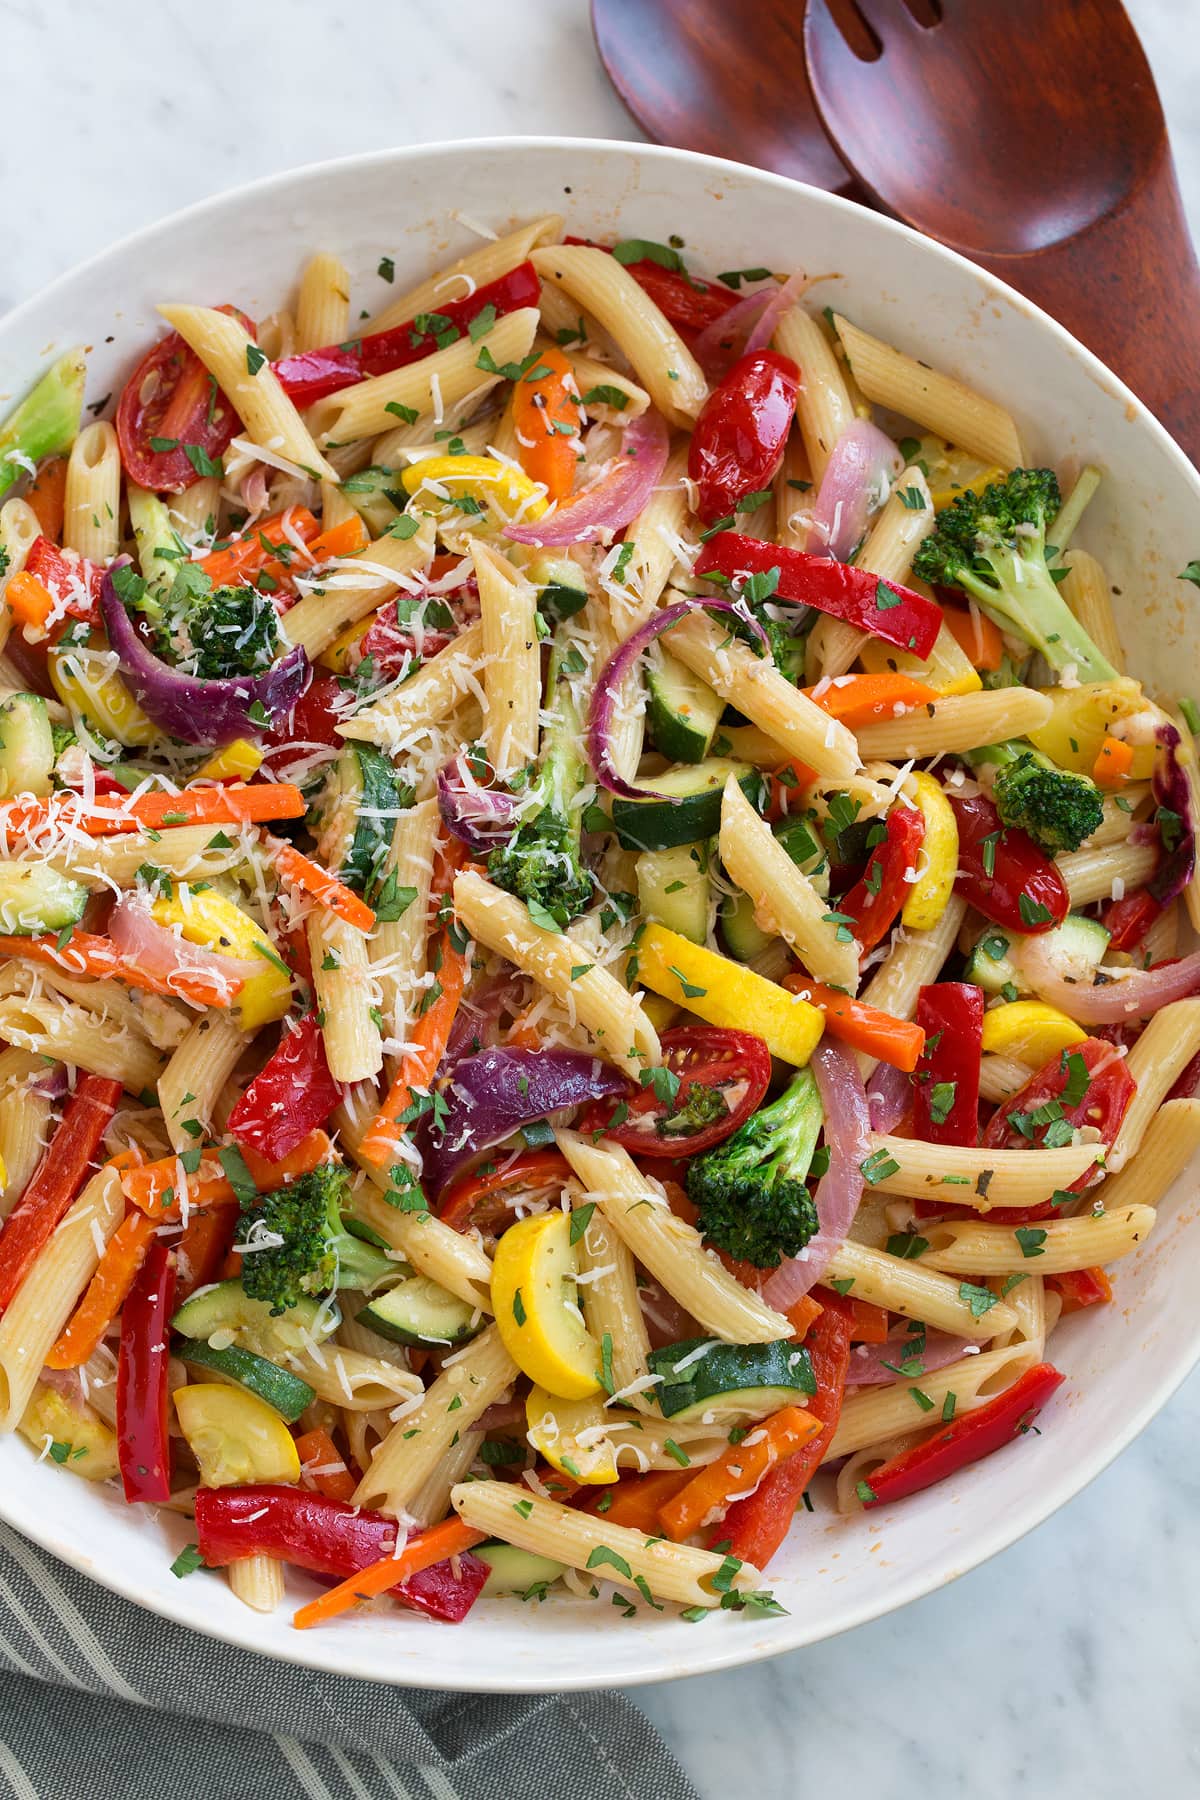 what vegetables go with pasta?